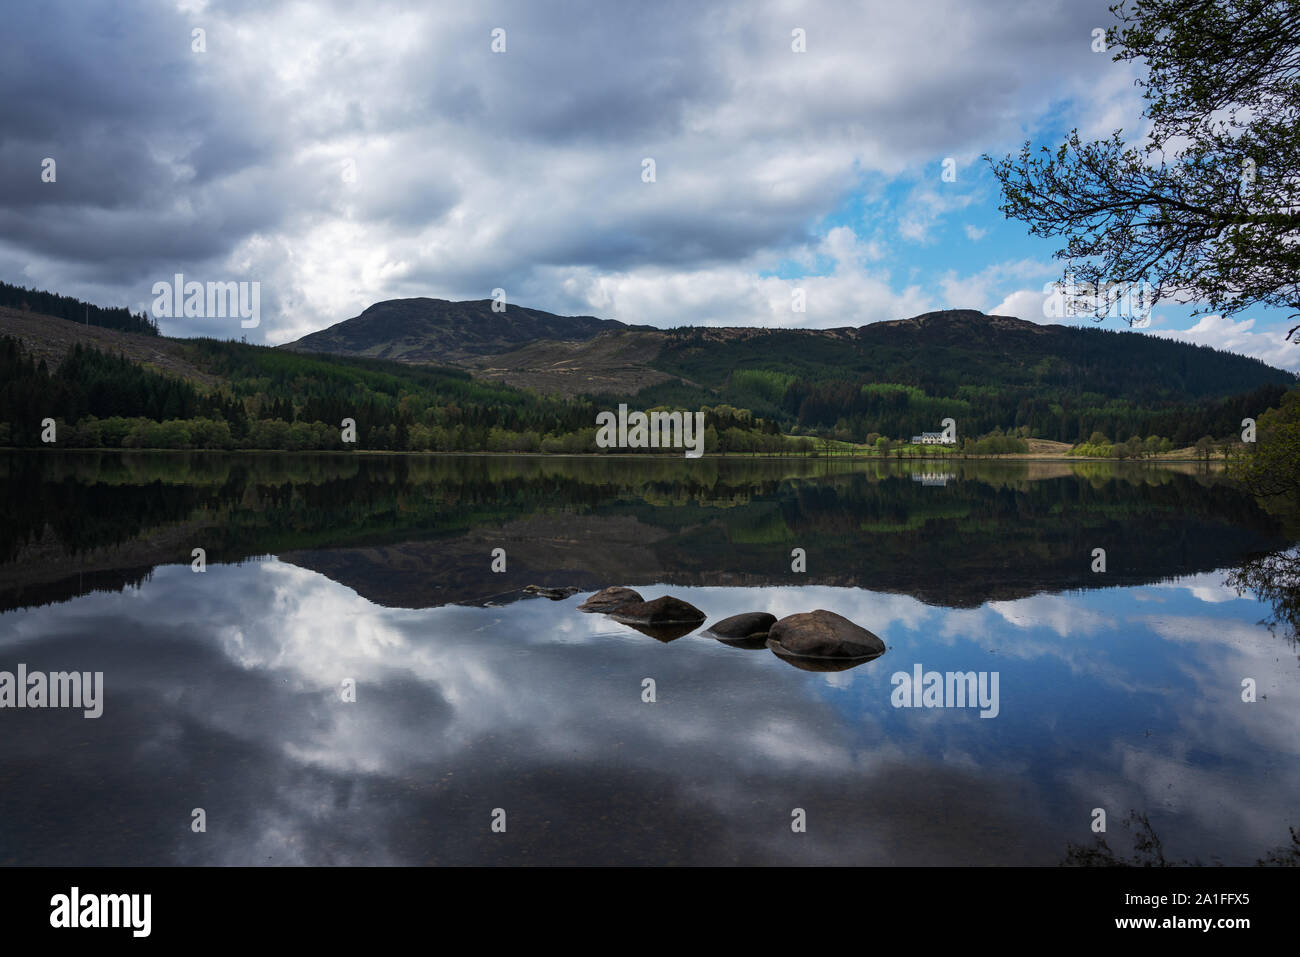 The weather was so calm that a perfect mirror was created at the scottish loch Stock Photo